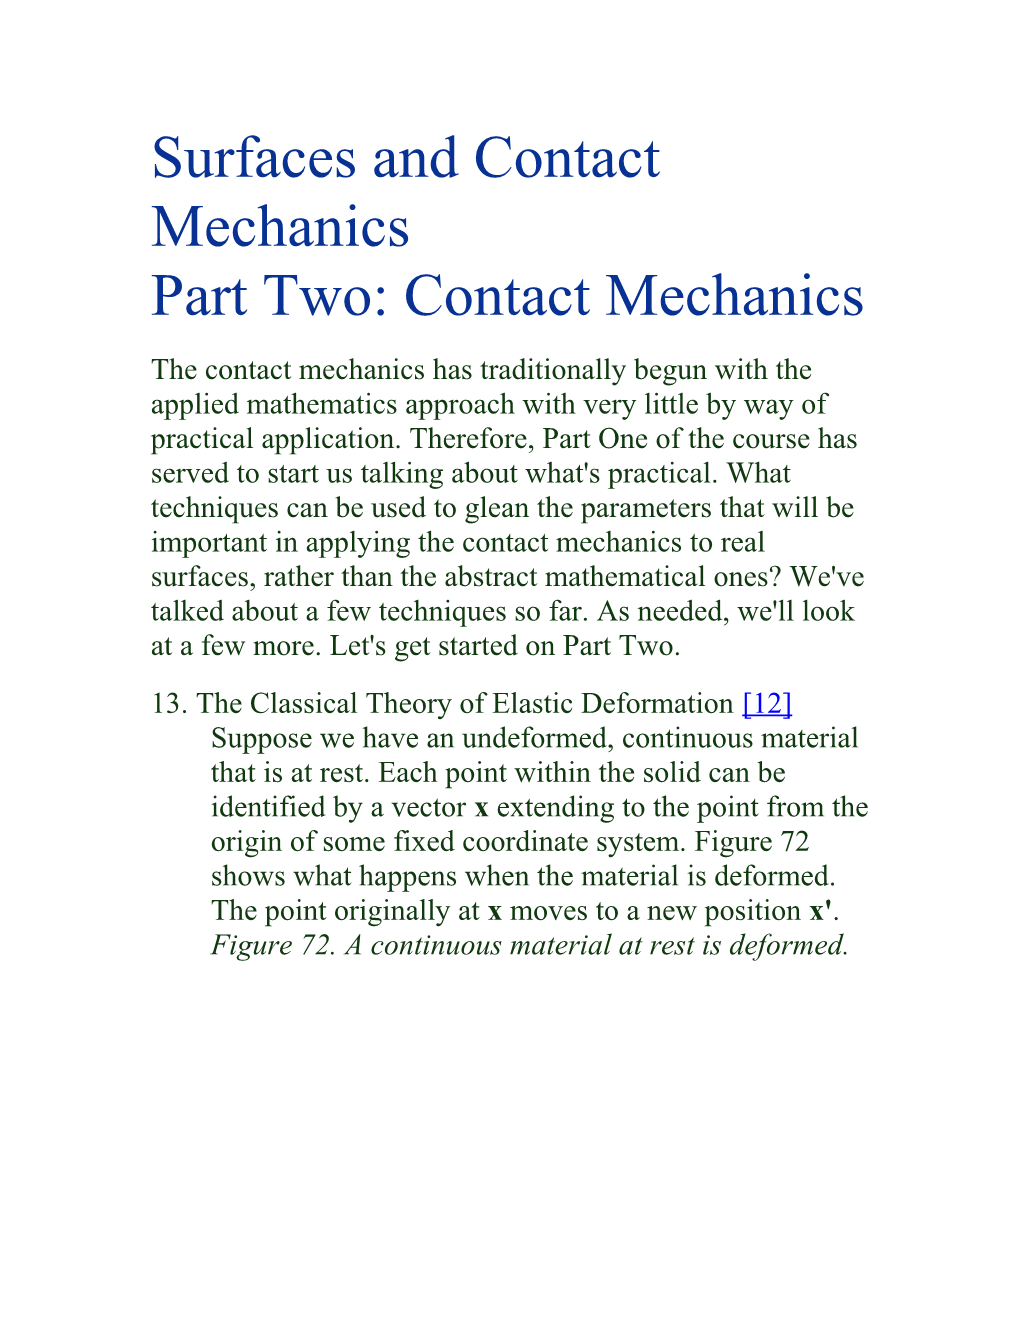 Surfaces and Contact Mechanics